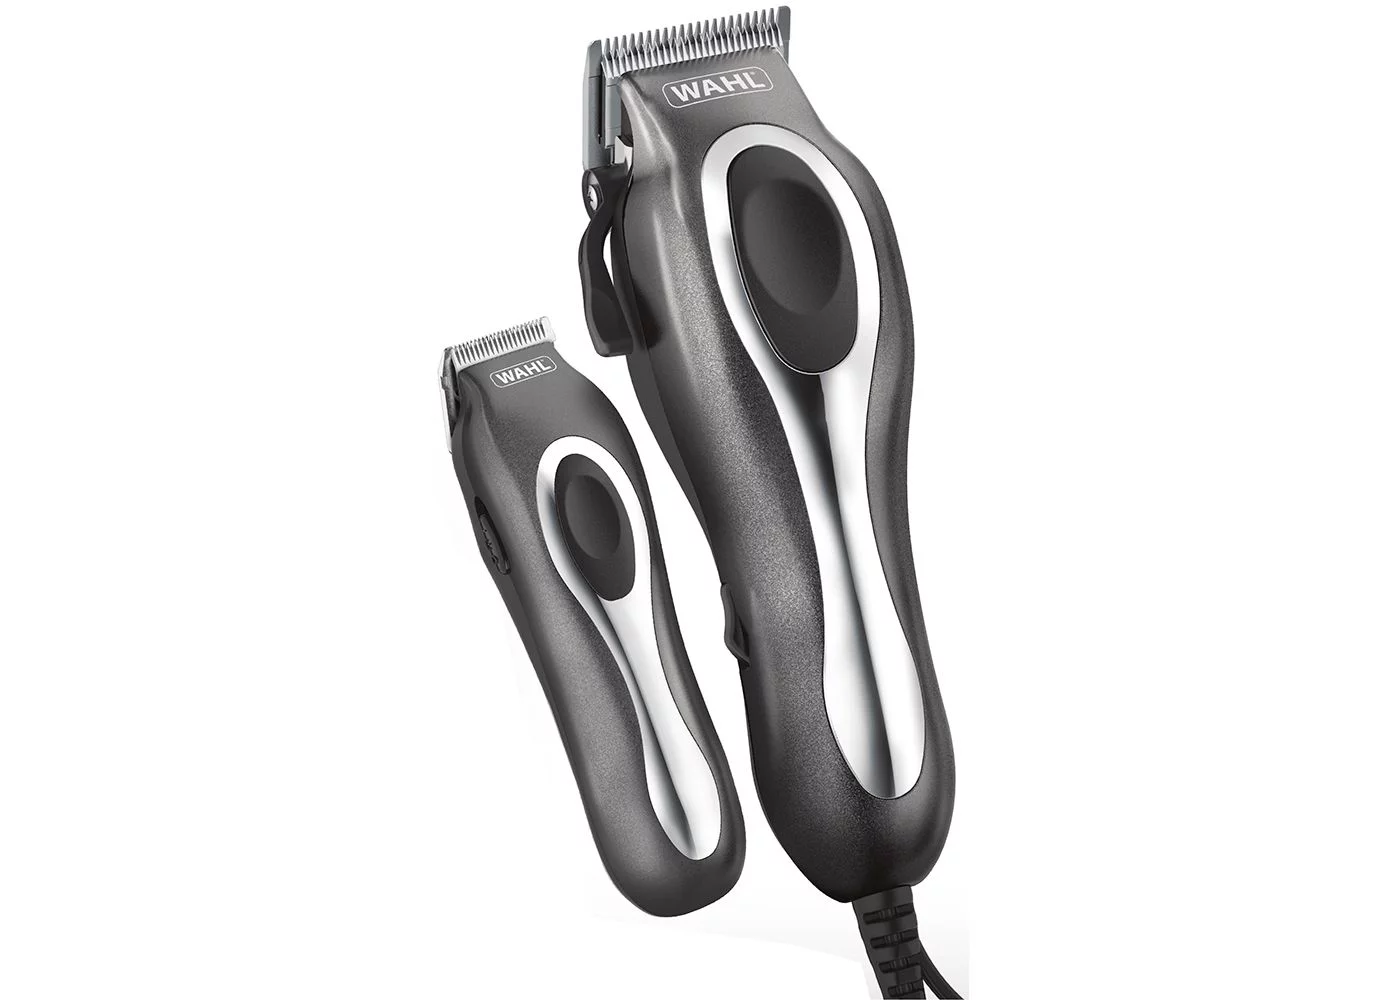 Wahl Deluxe Chrome Pro Complete Men's Haircut Trimmer Kit with Storage Case, Black